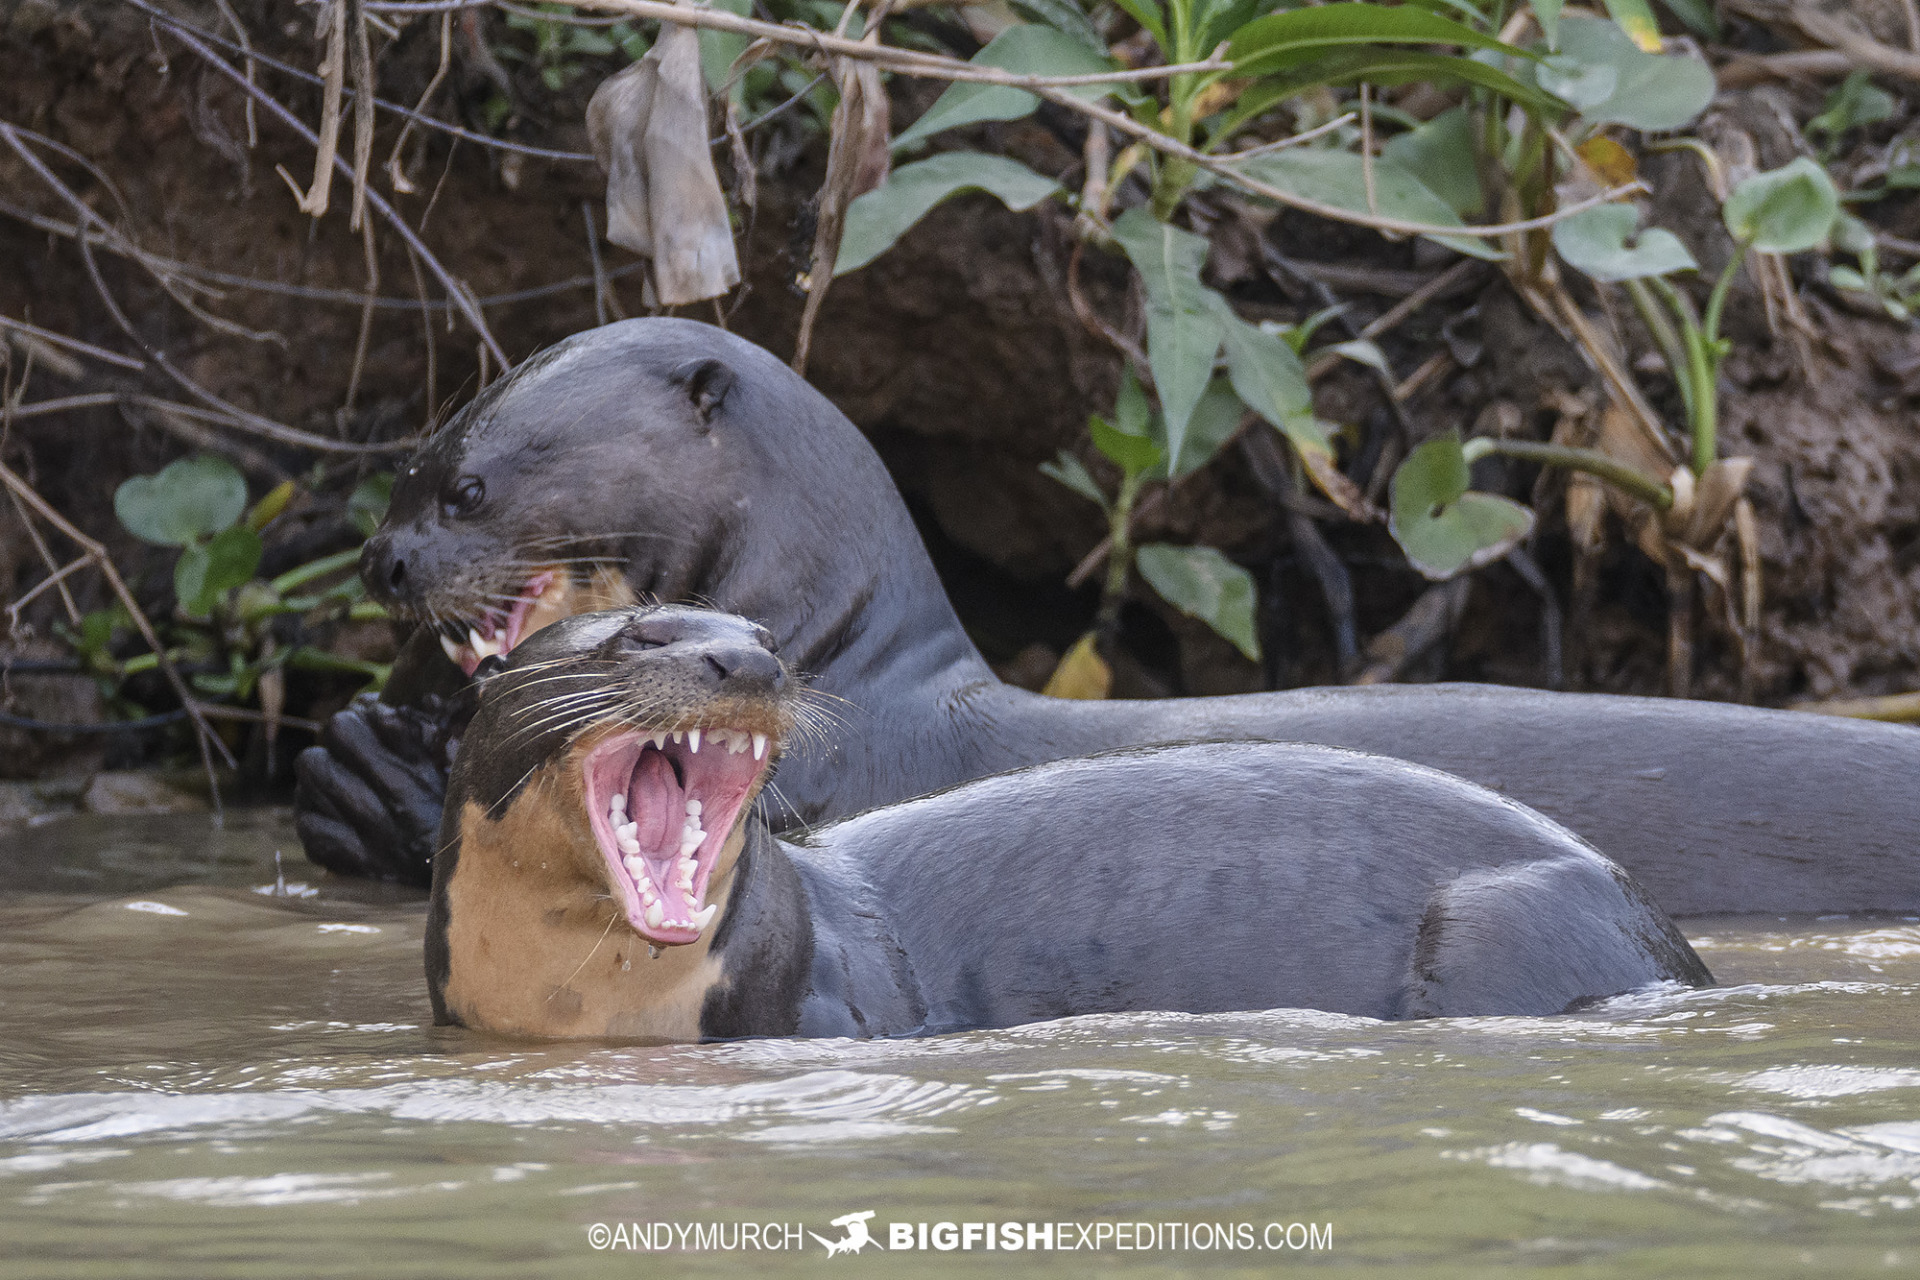 Giant River Otters in the Pantanal.